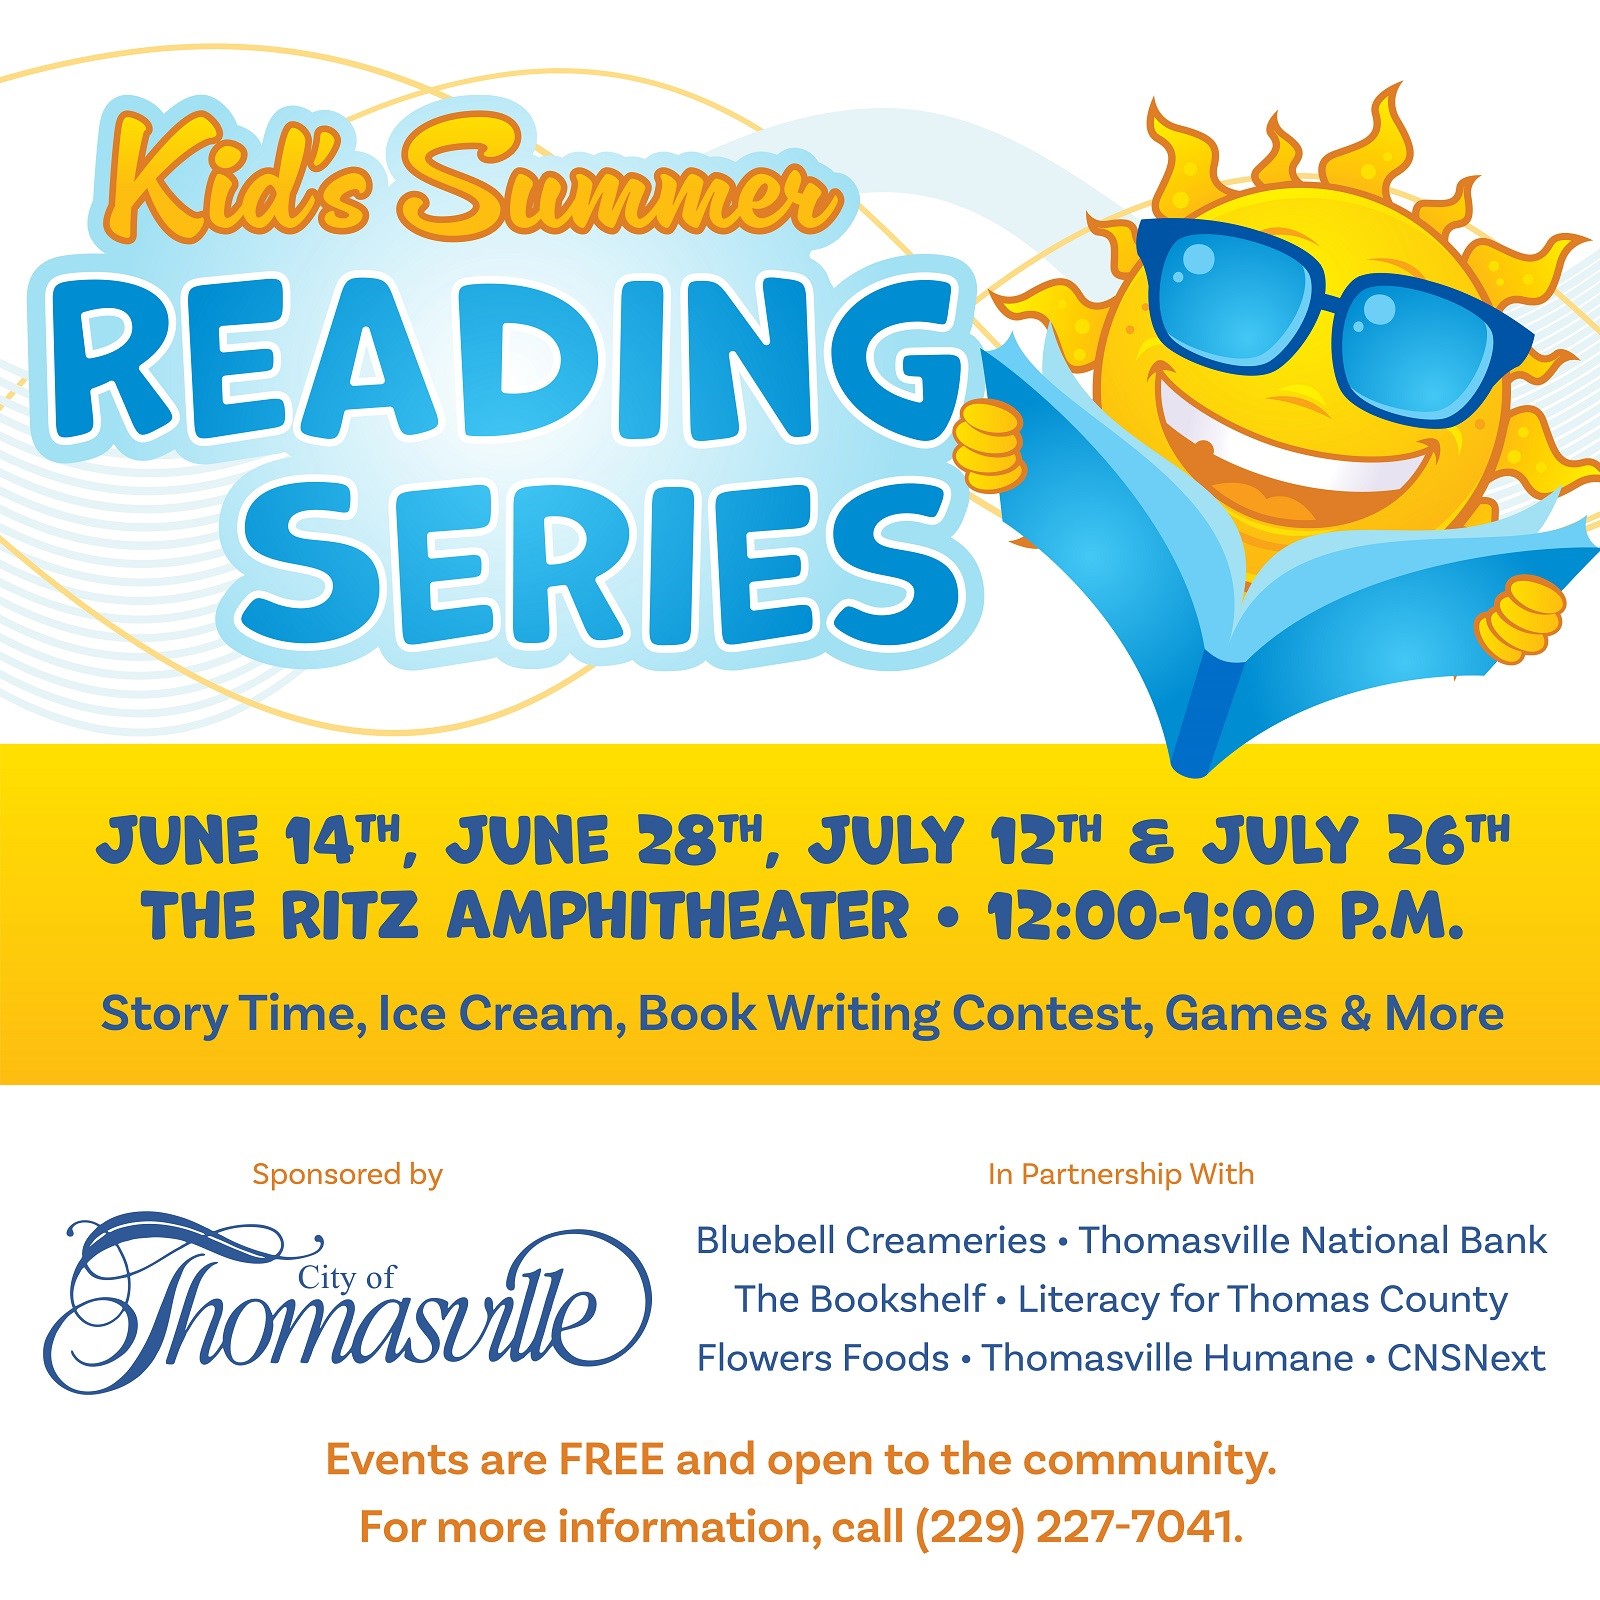 Photo for CITY OF THOMASVILLE TO HOST KIDS SUMMER READING SERIES 